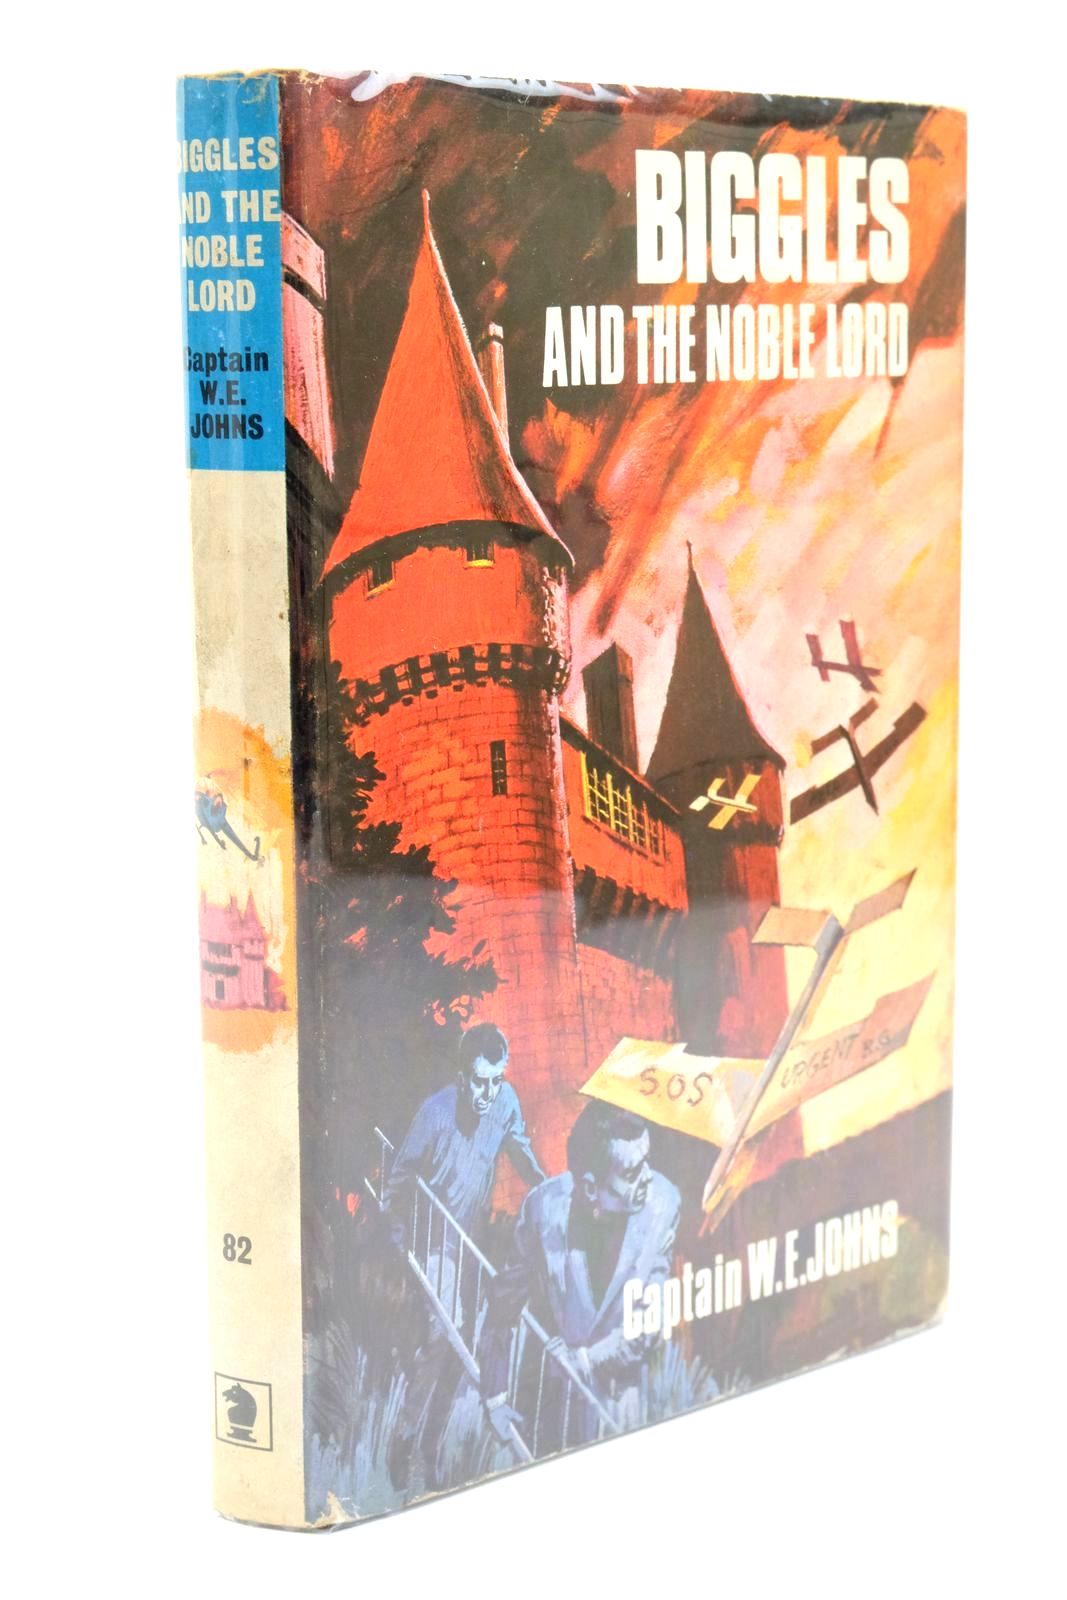 Photo of BIGGLES AND THE NOBLE LORD written by Johns, W.E. published by Brockhampton Press (STOCK CODE: 1322742)  for sale by Stella & Rose's Books